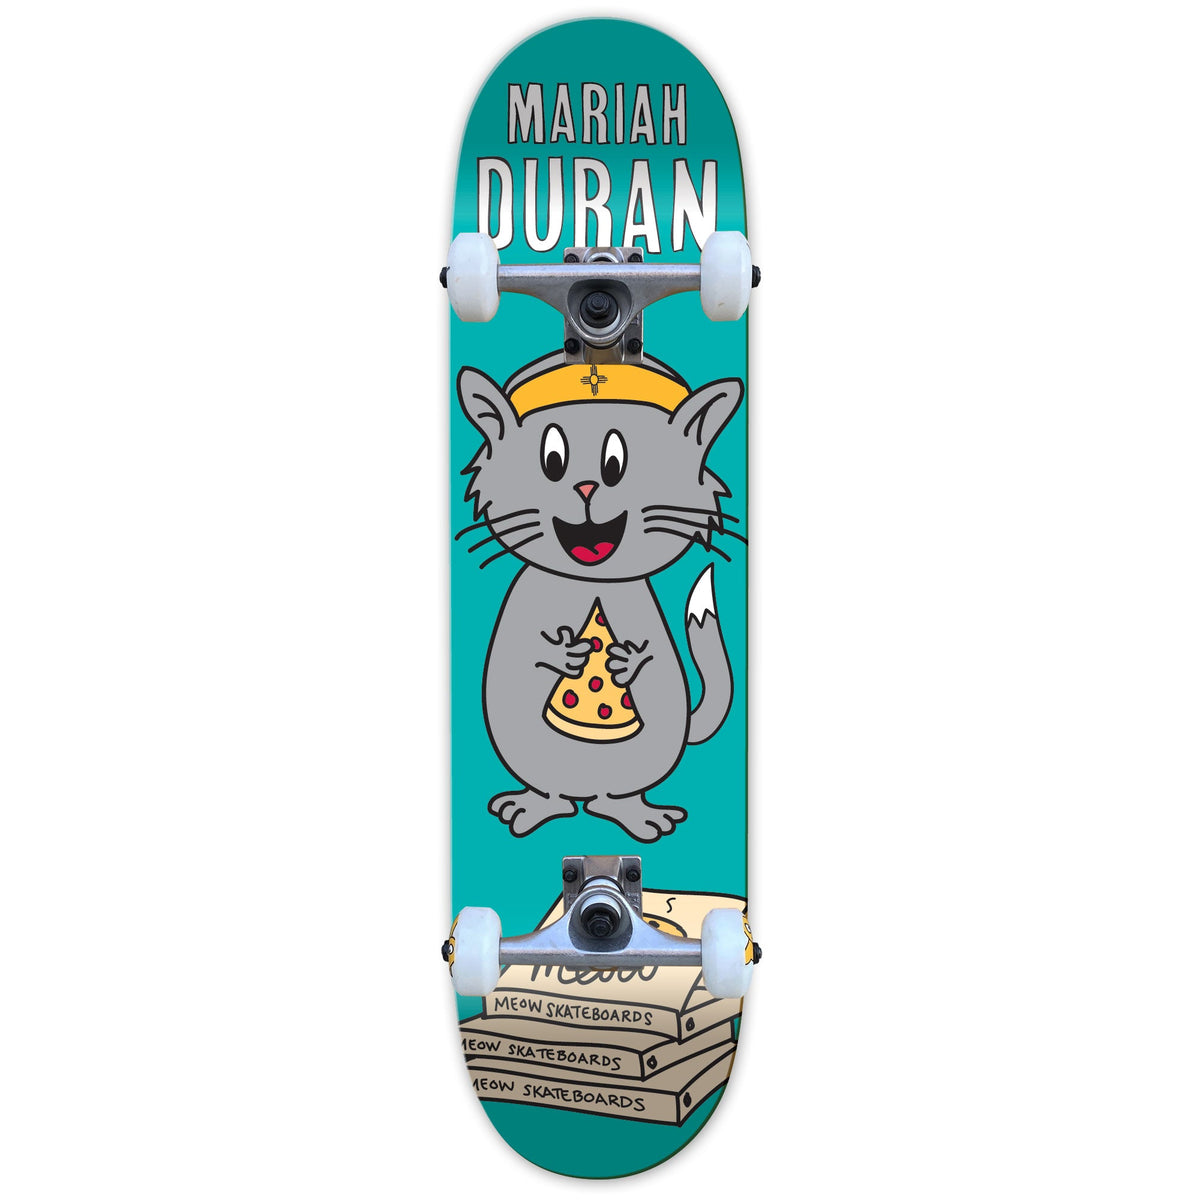 Meow Skateboards Completes